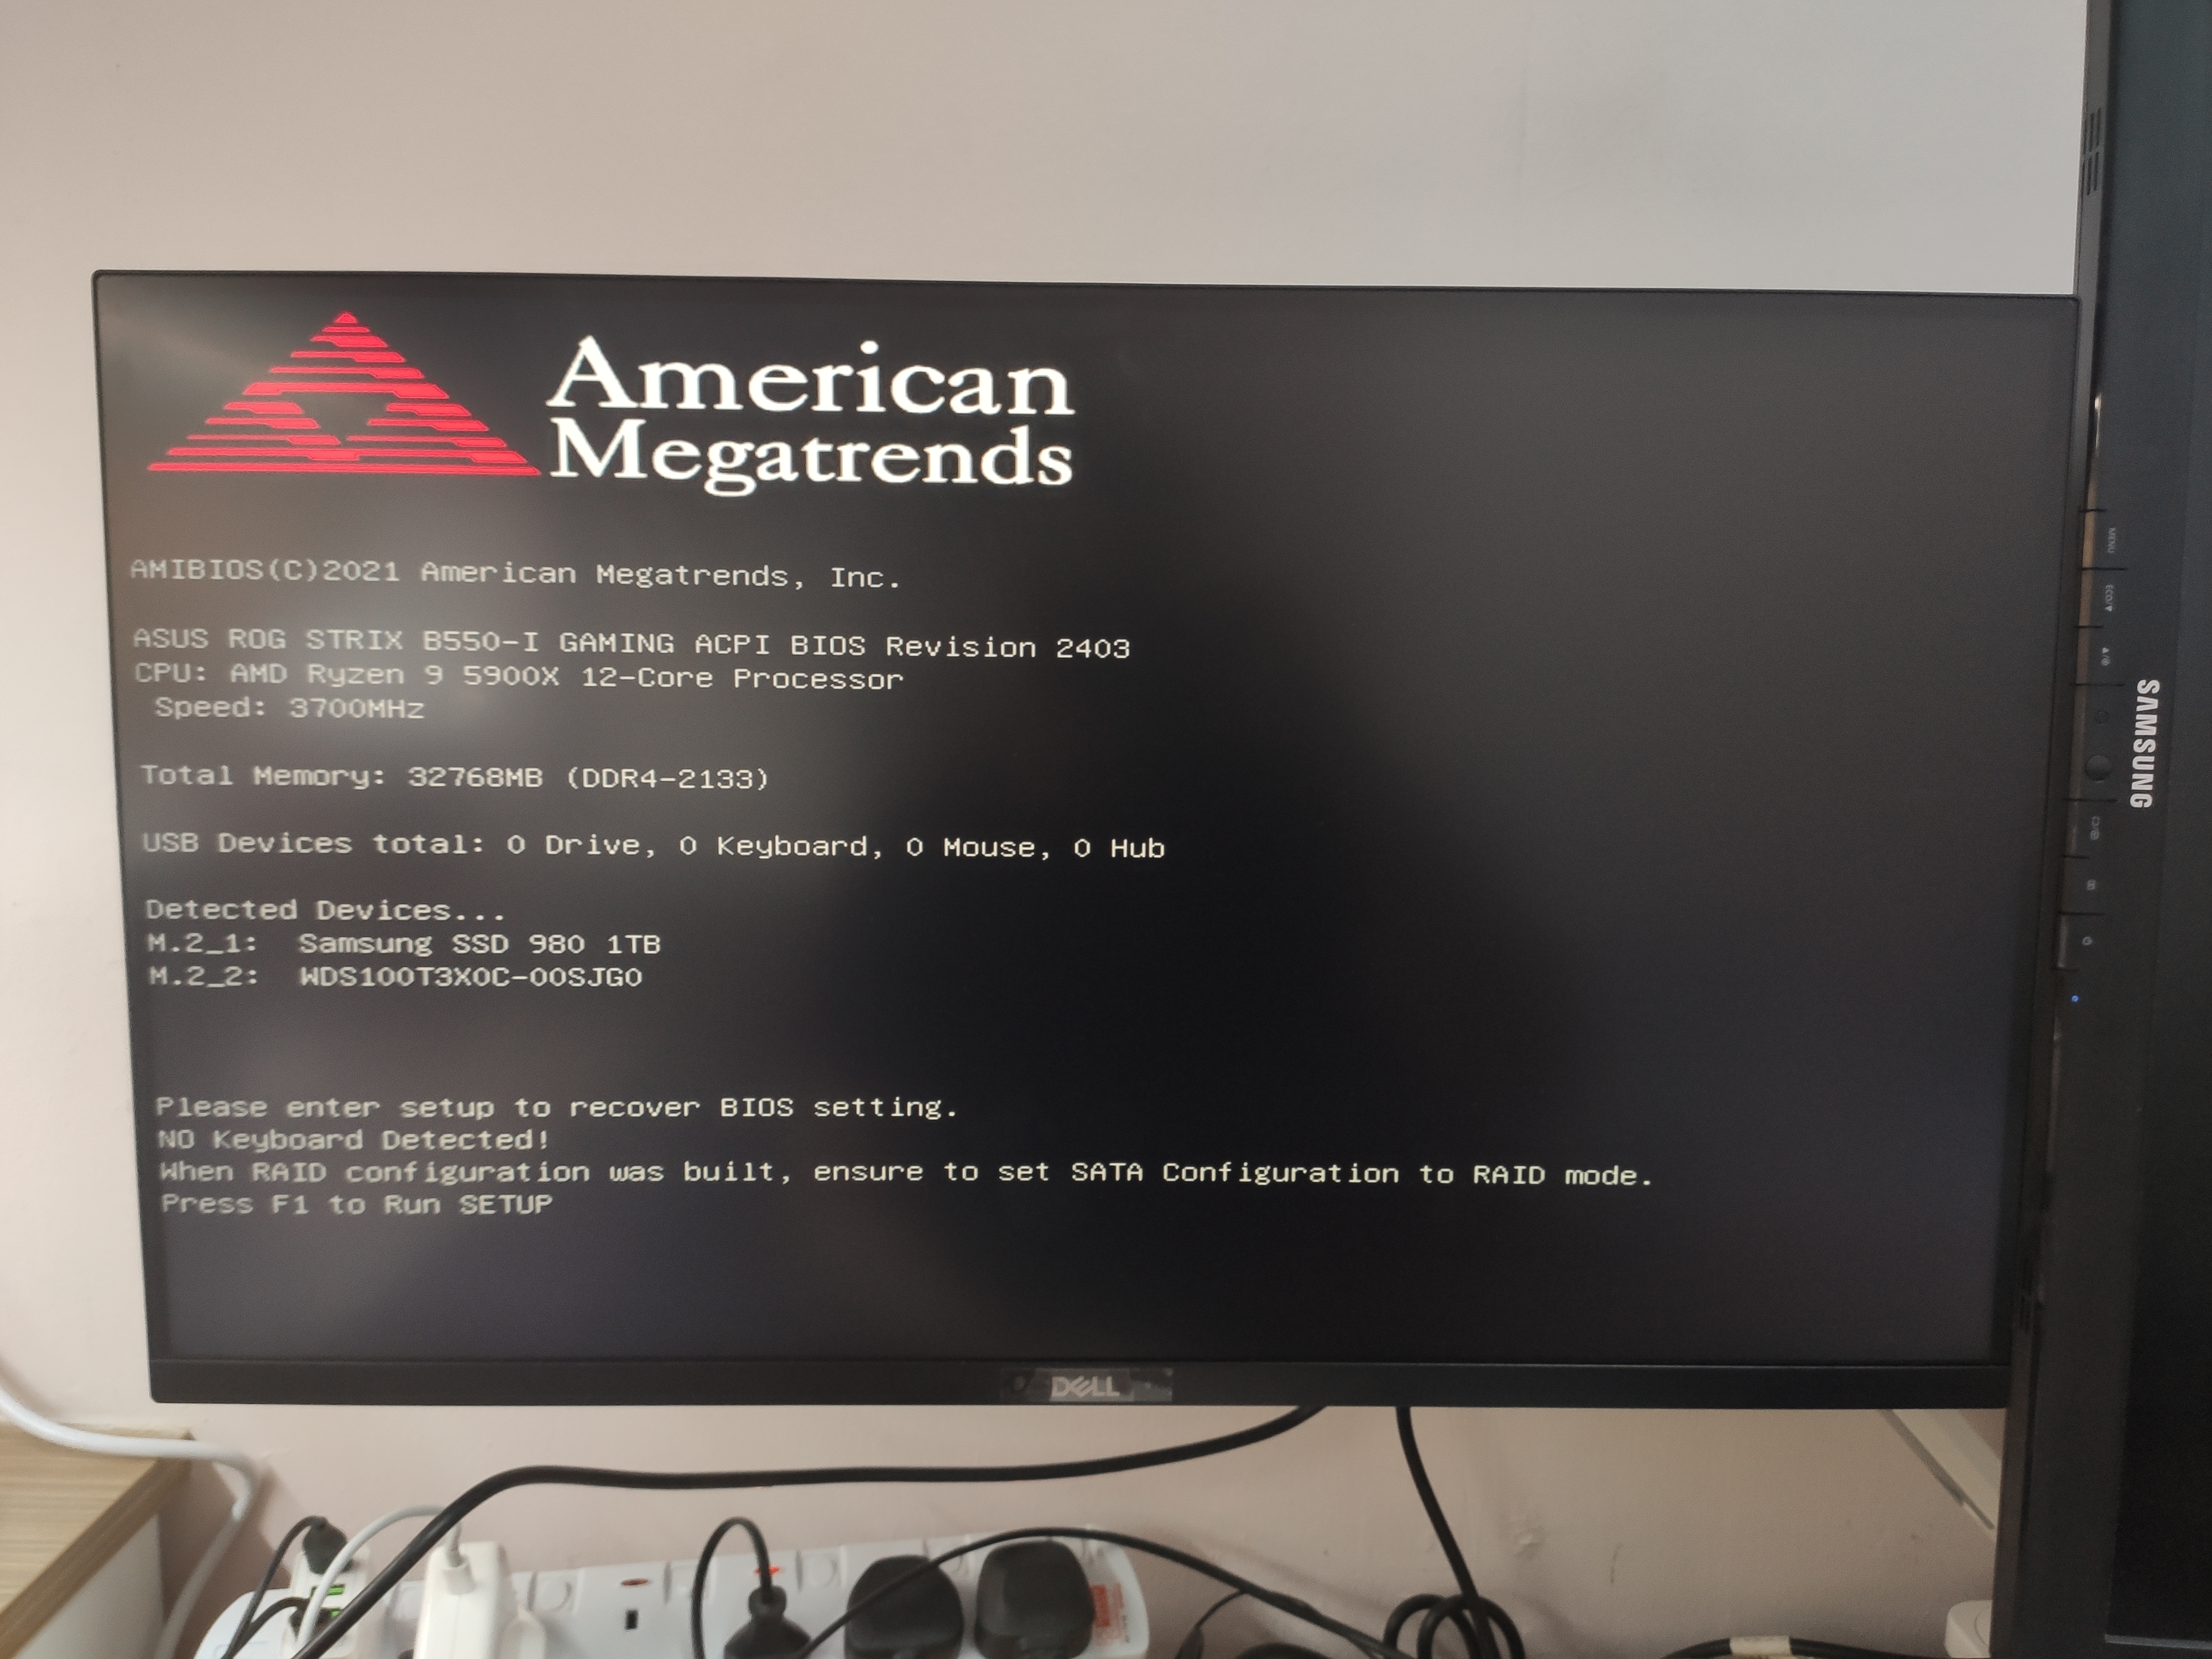 boot up screen